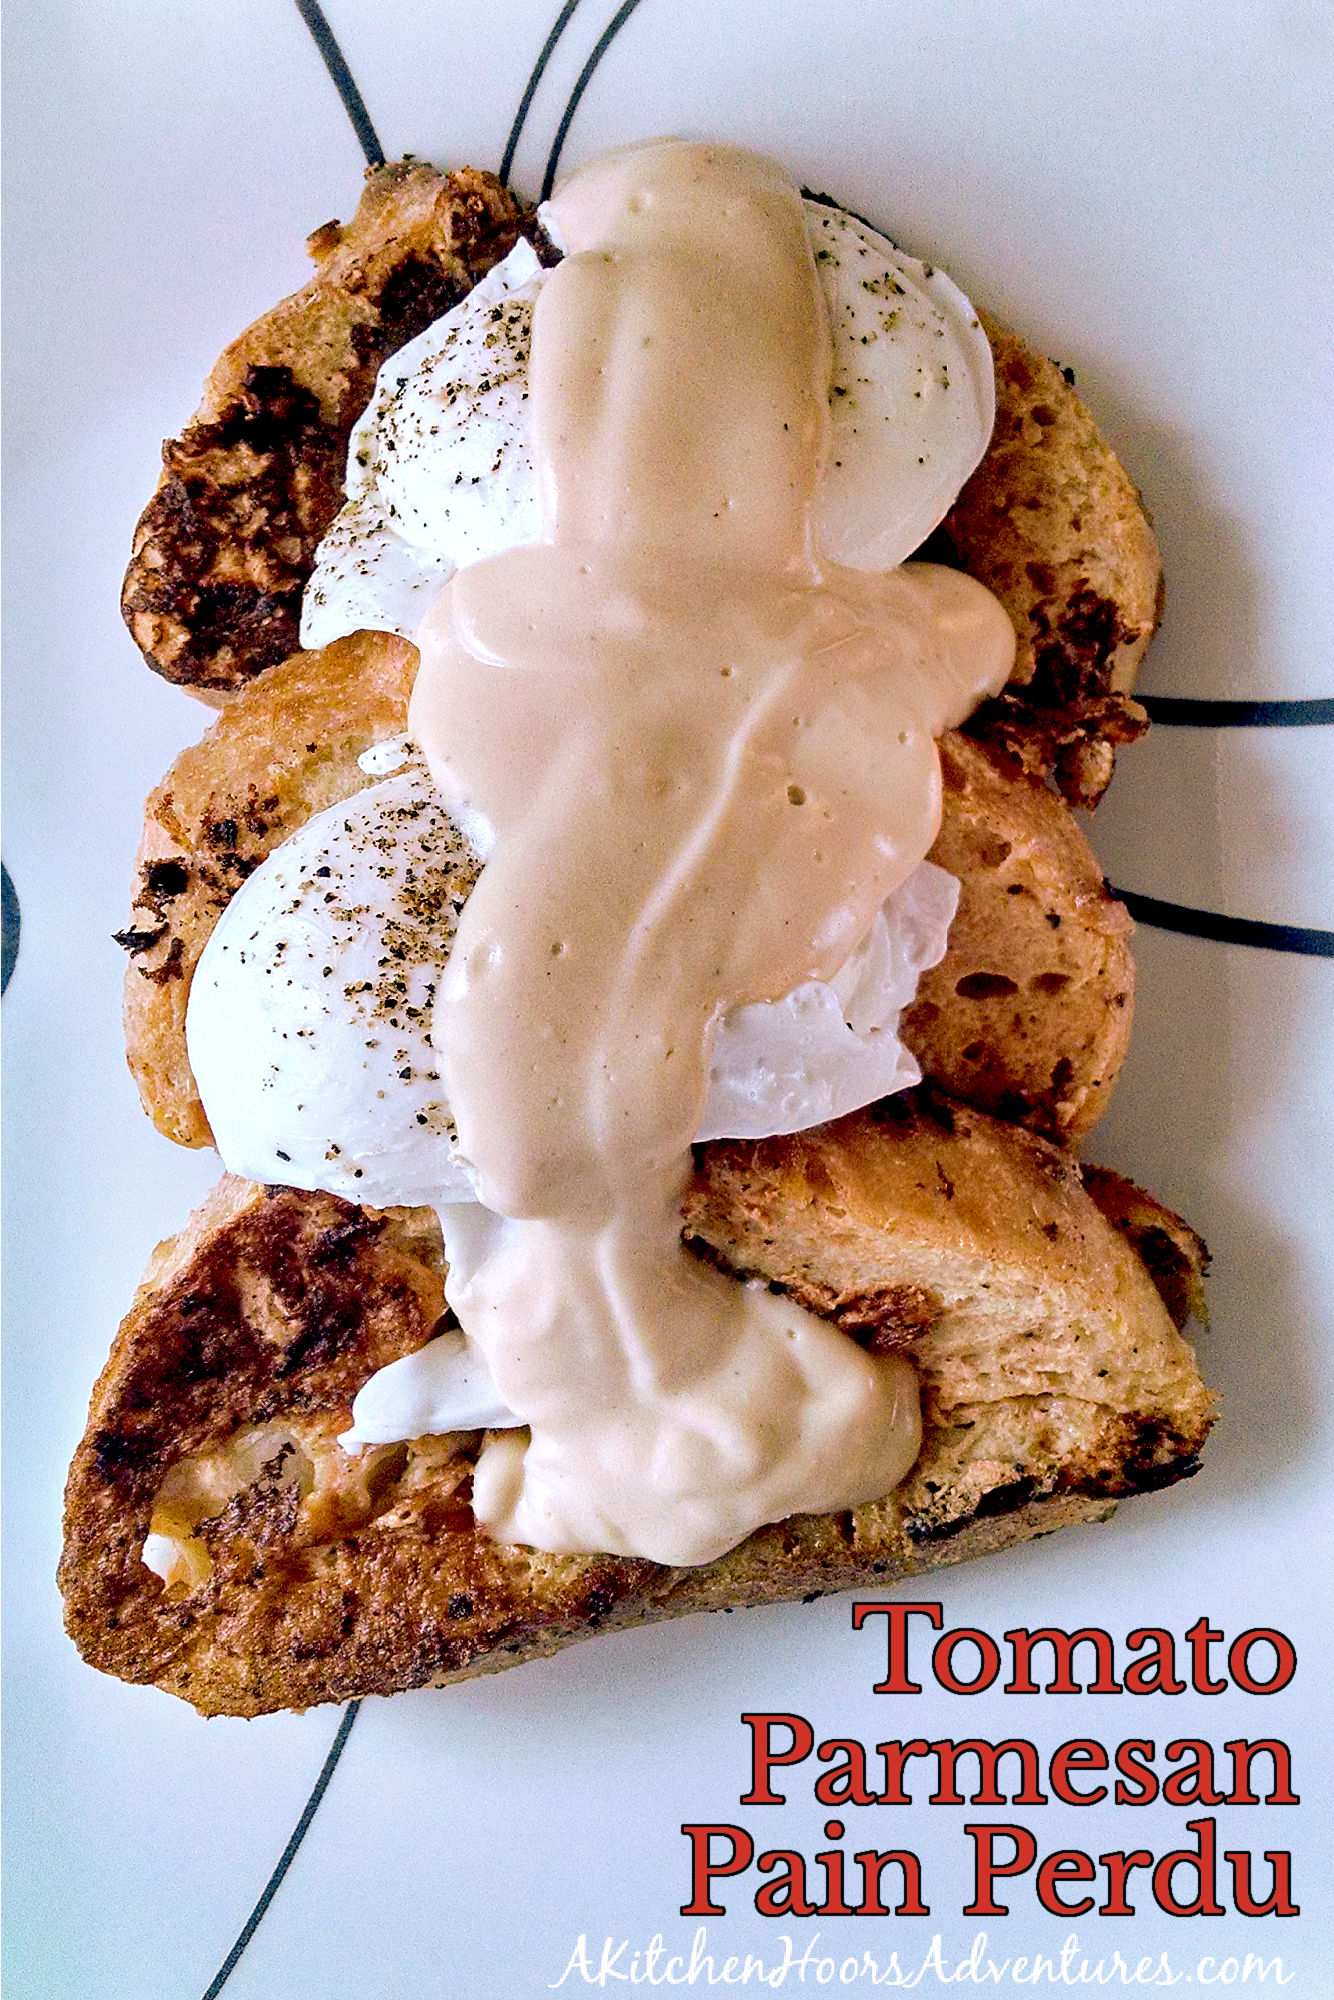 Savory French toast is not only different, but is amazingly tasty! This Tomato Parmesan Pain Perdu with Poached Eggs and Rarebit Sauce is hearty enough for any meat eater.